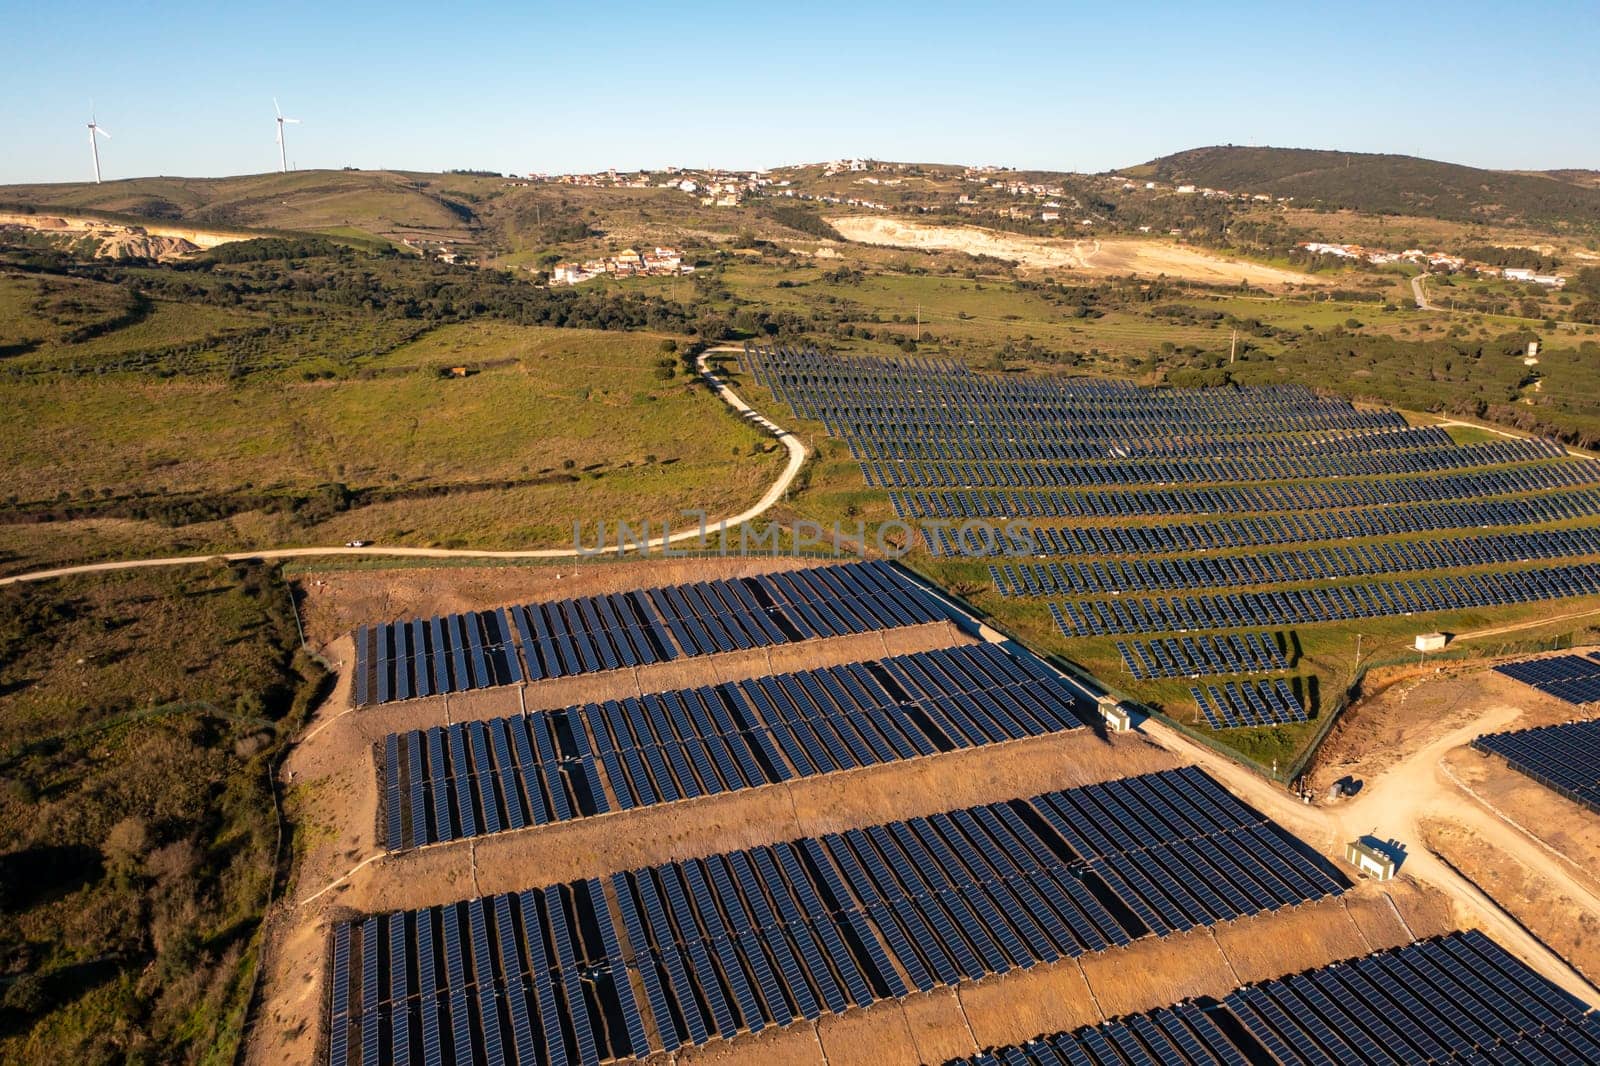 Long rows of photovoltaic panels at solar farm for converting energy of sun to electricity in concept of renewable energy and natural resources. Aerial view